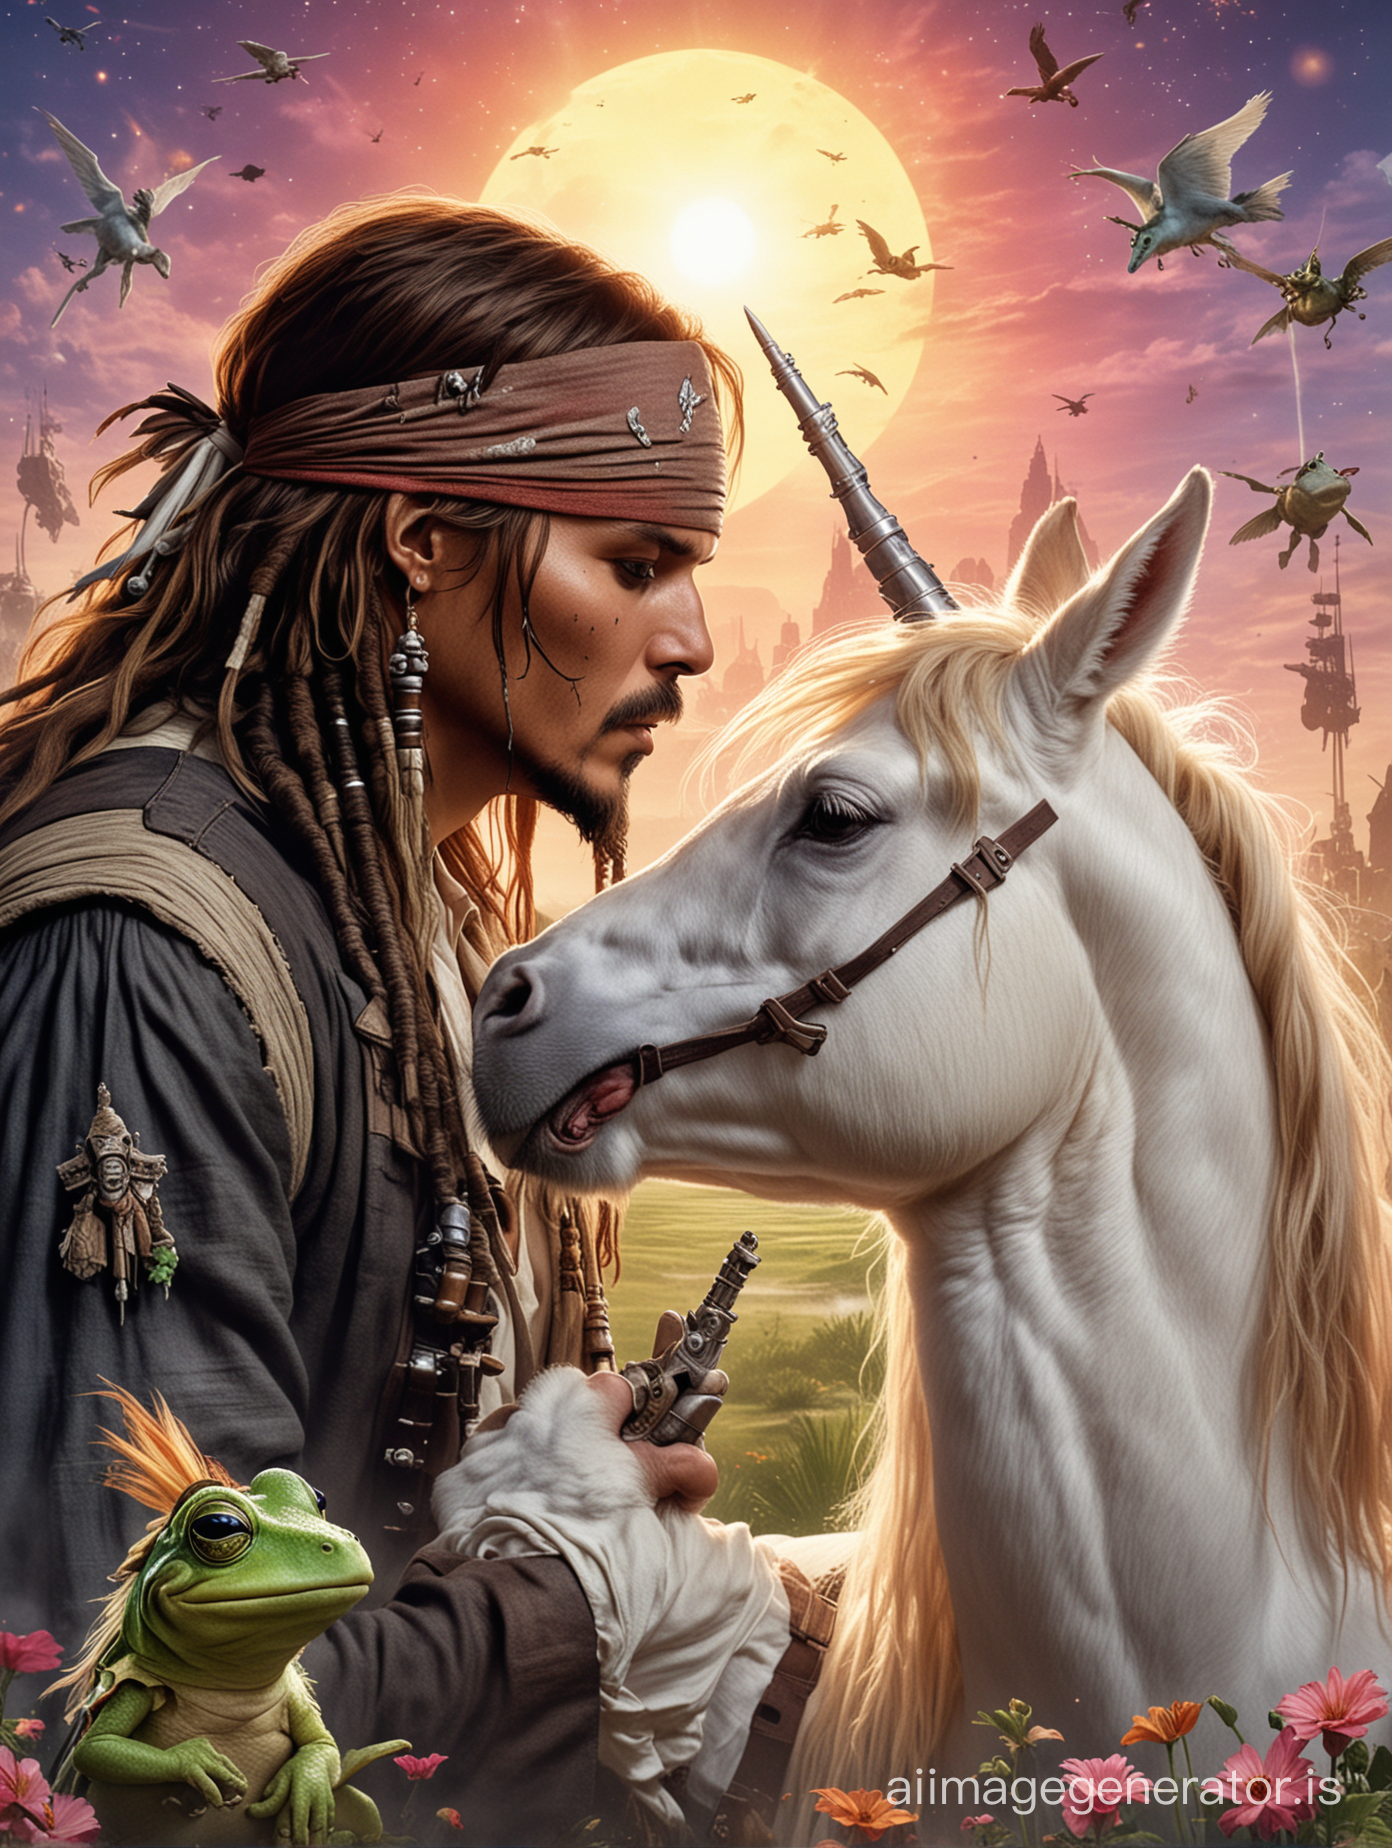 Star Wars movie poster. Capitan jack Sparrow kissing a frog on a unicorn. Star Wars battle in the background